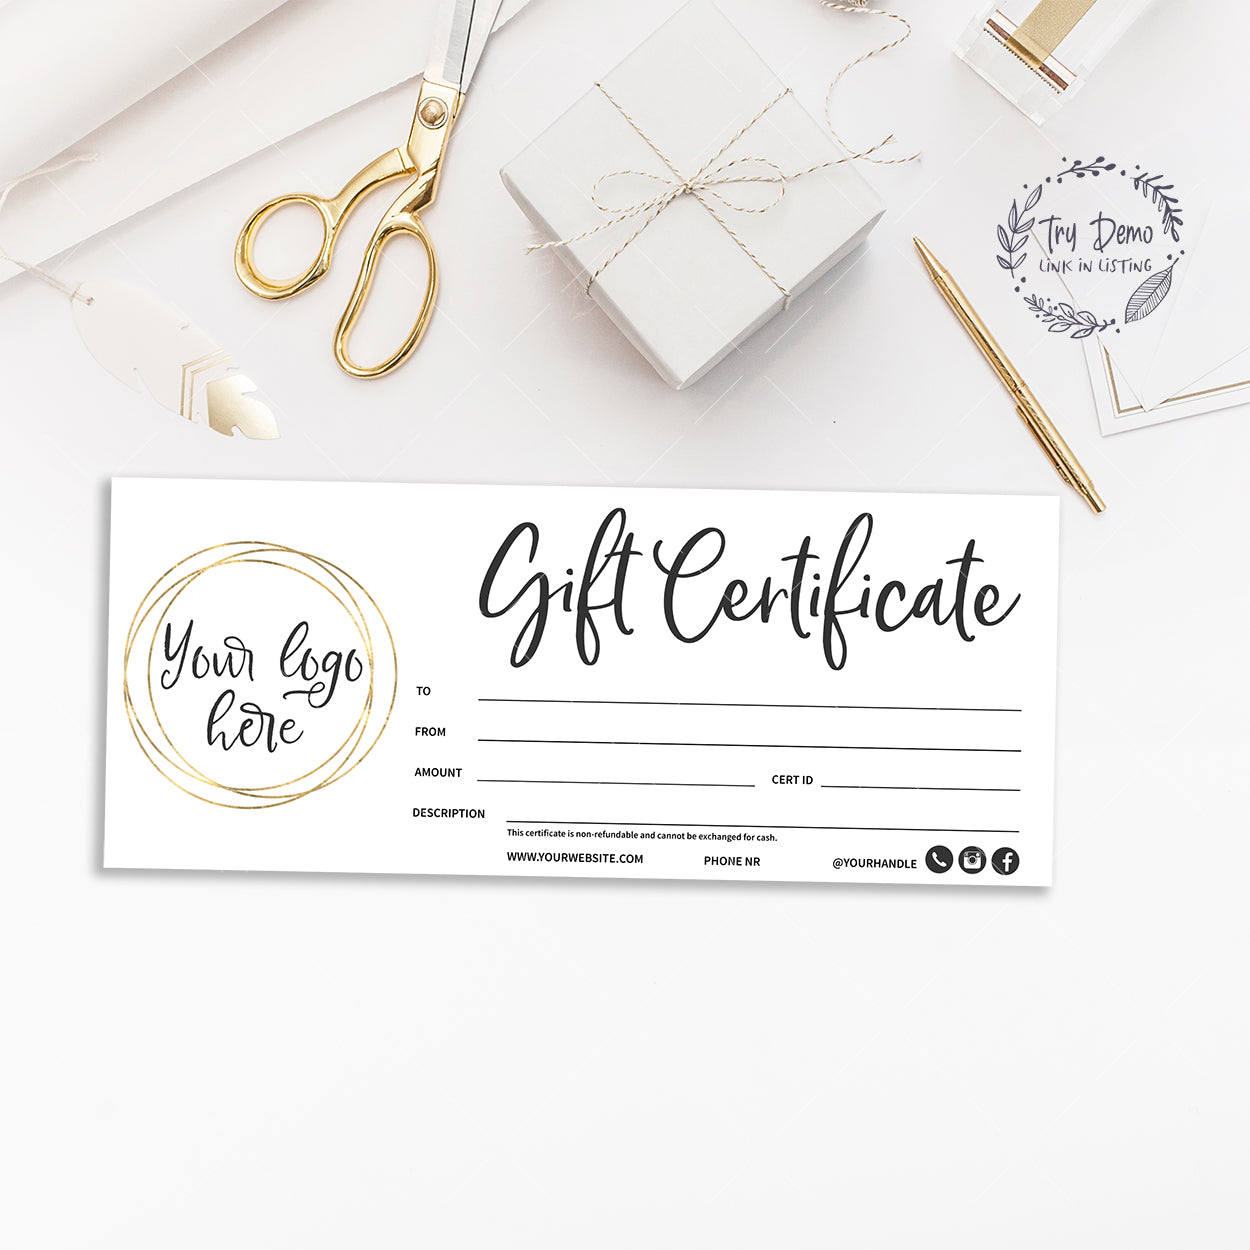 Blank Gift Certificate Template 8.5 x 3.5"